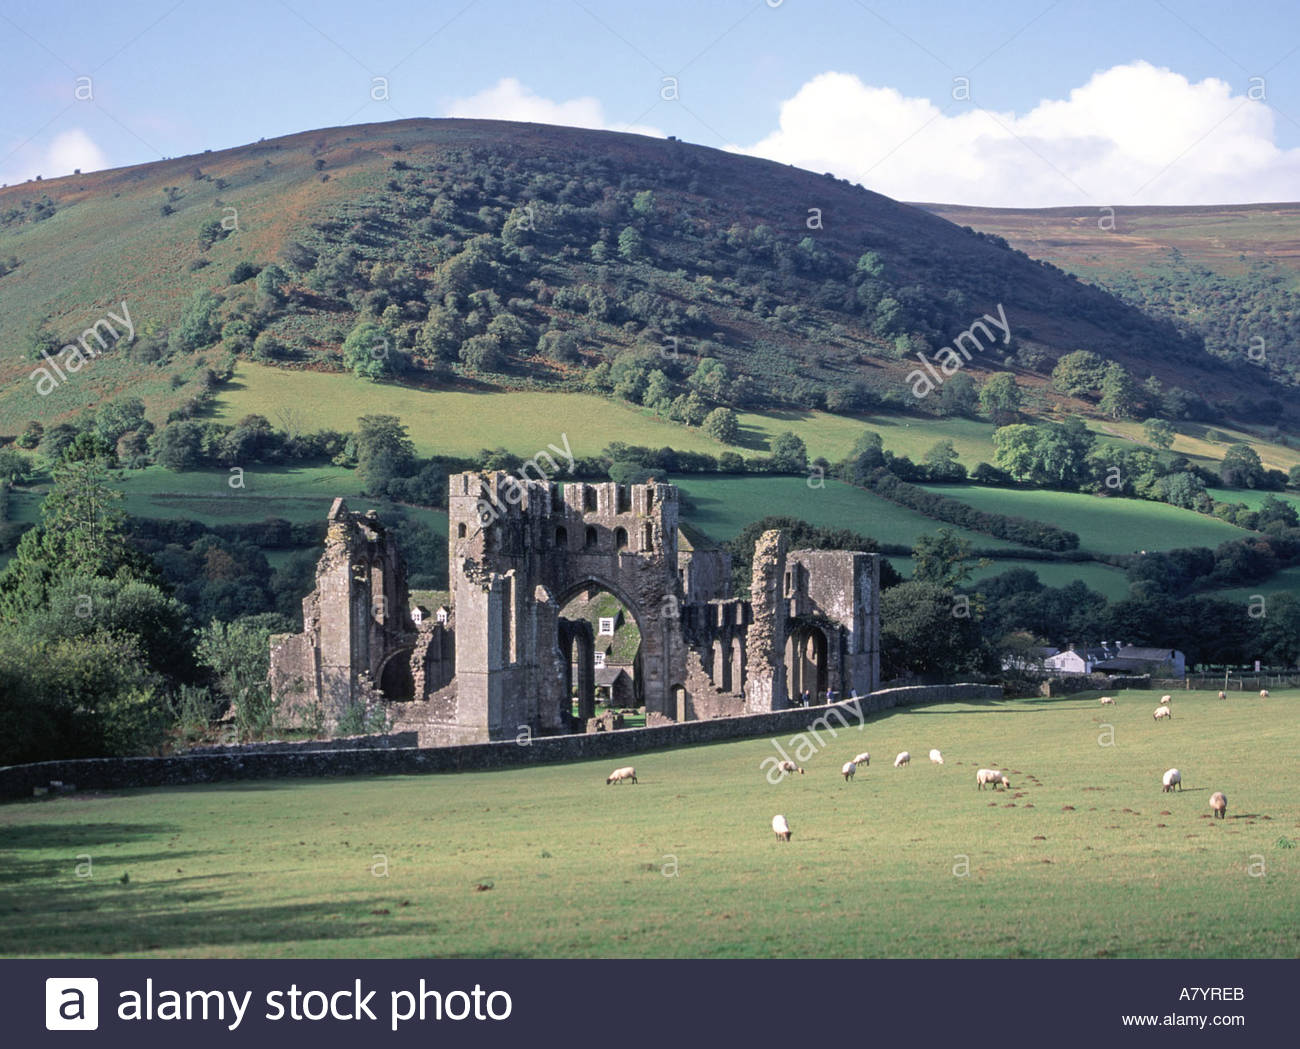 Llanthony Priory Backgrounds on Wallpapers Vista